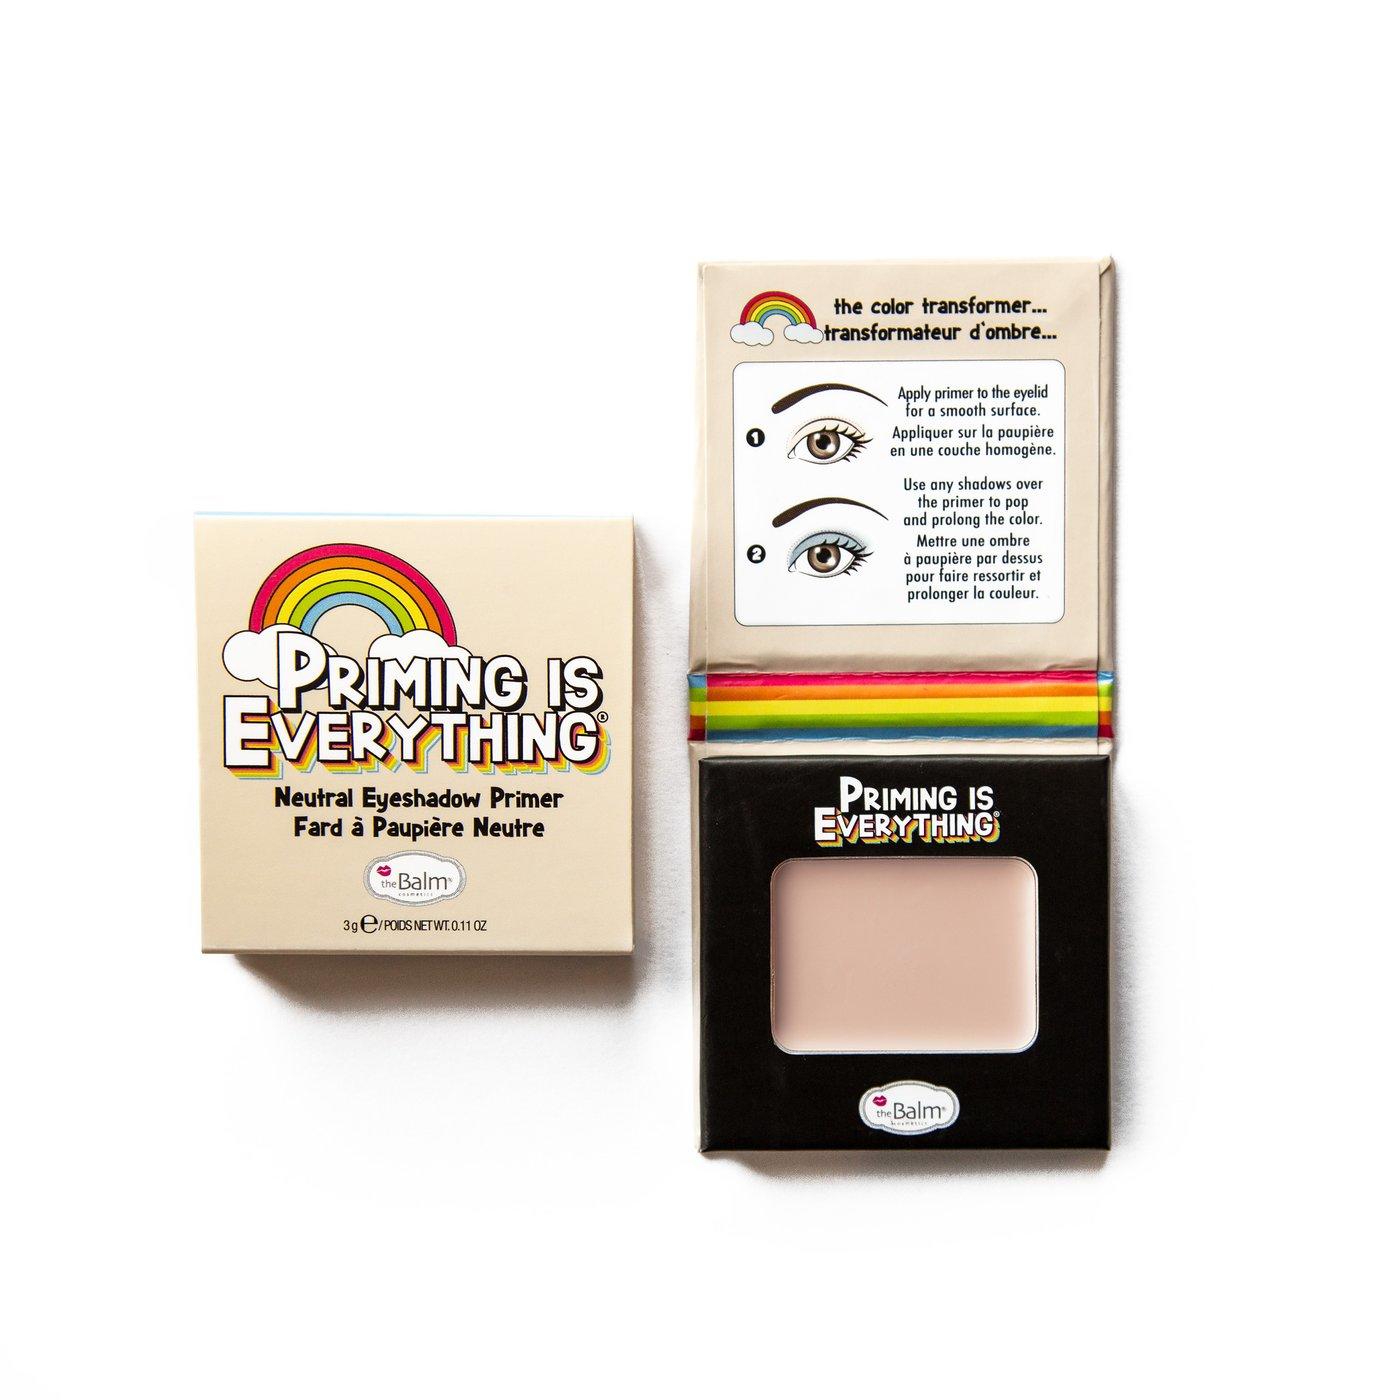 The Balm Priming Is Everything Neutral Eyeshadow Primer